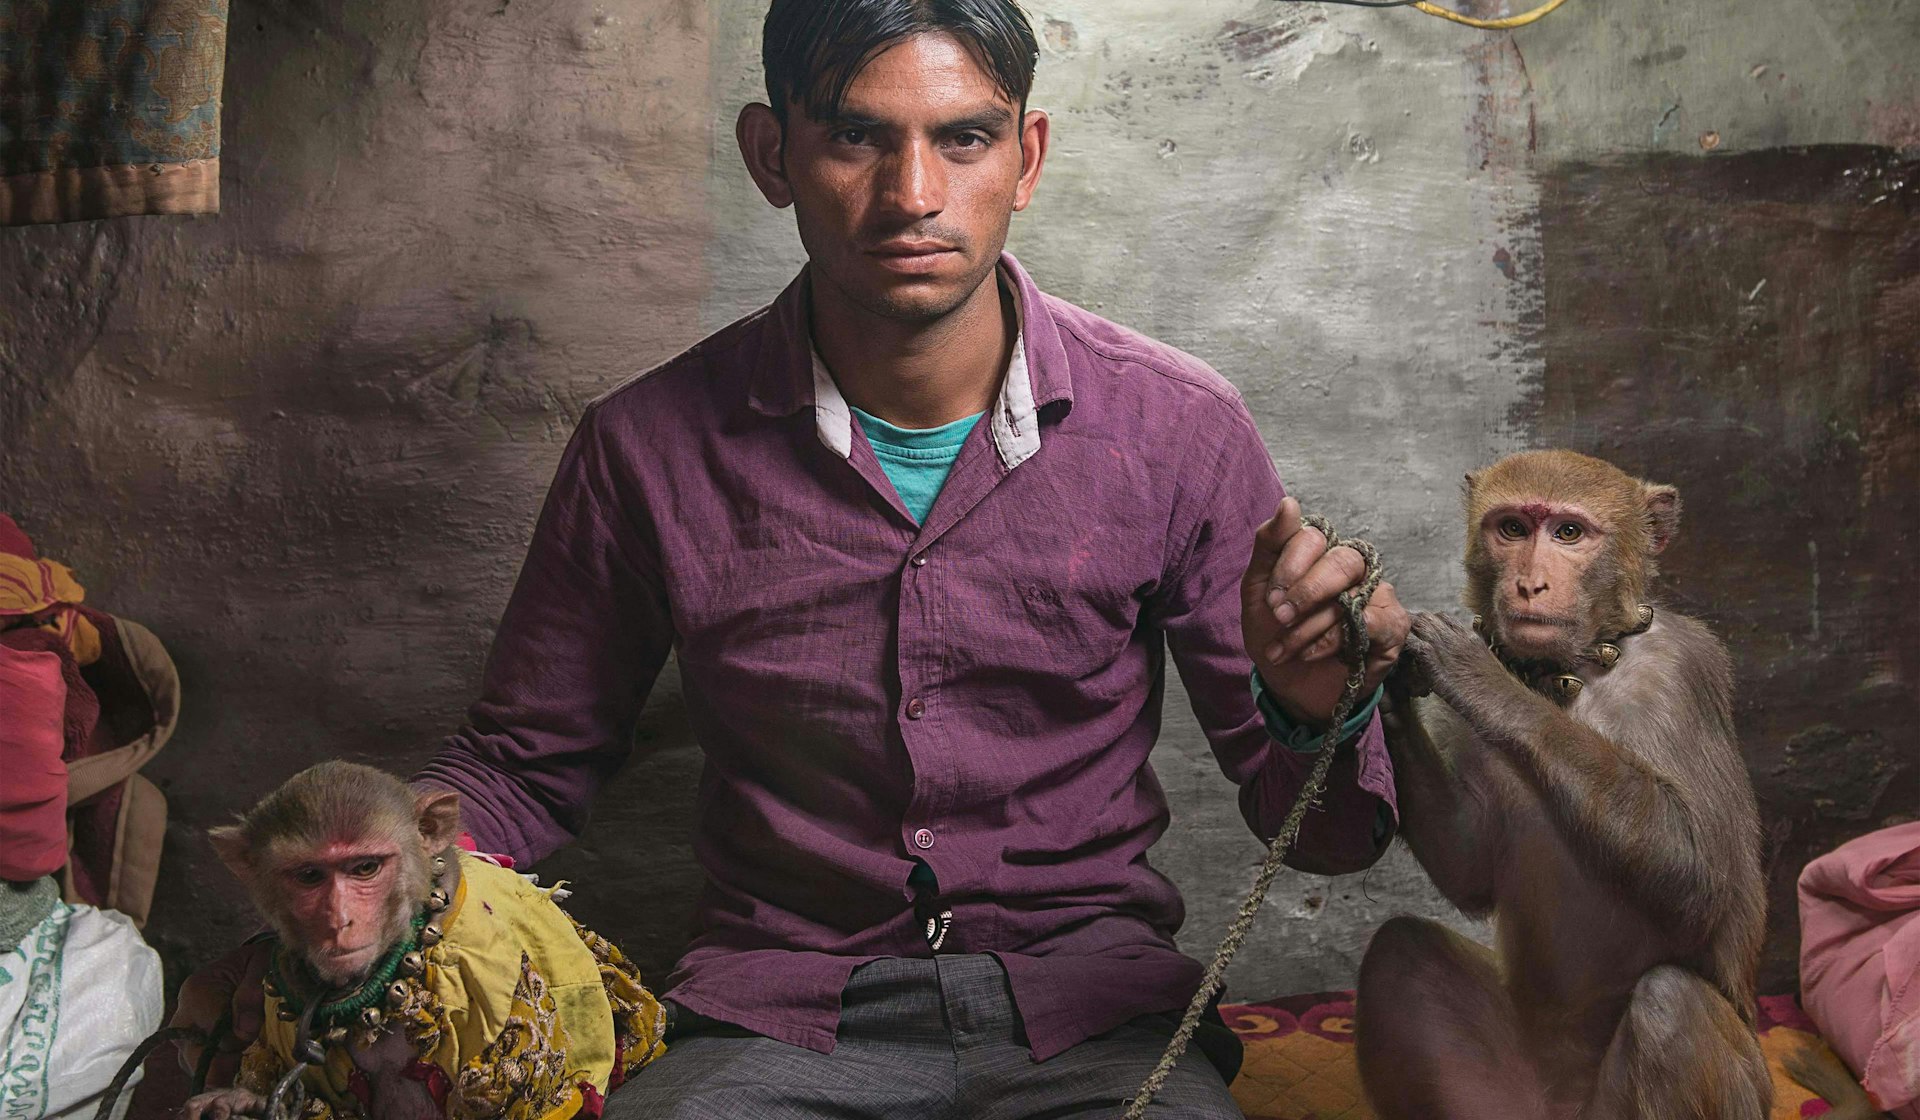 At home with Delhi’s snake charmers, magicians and acrobats